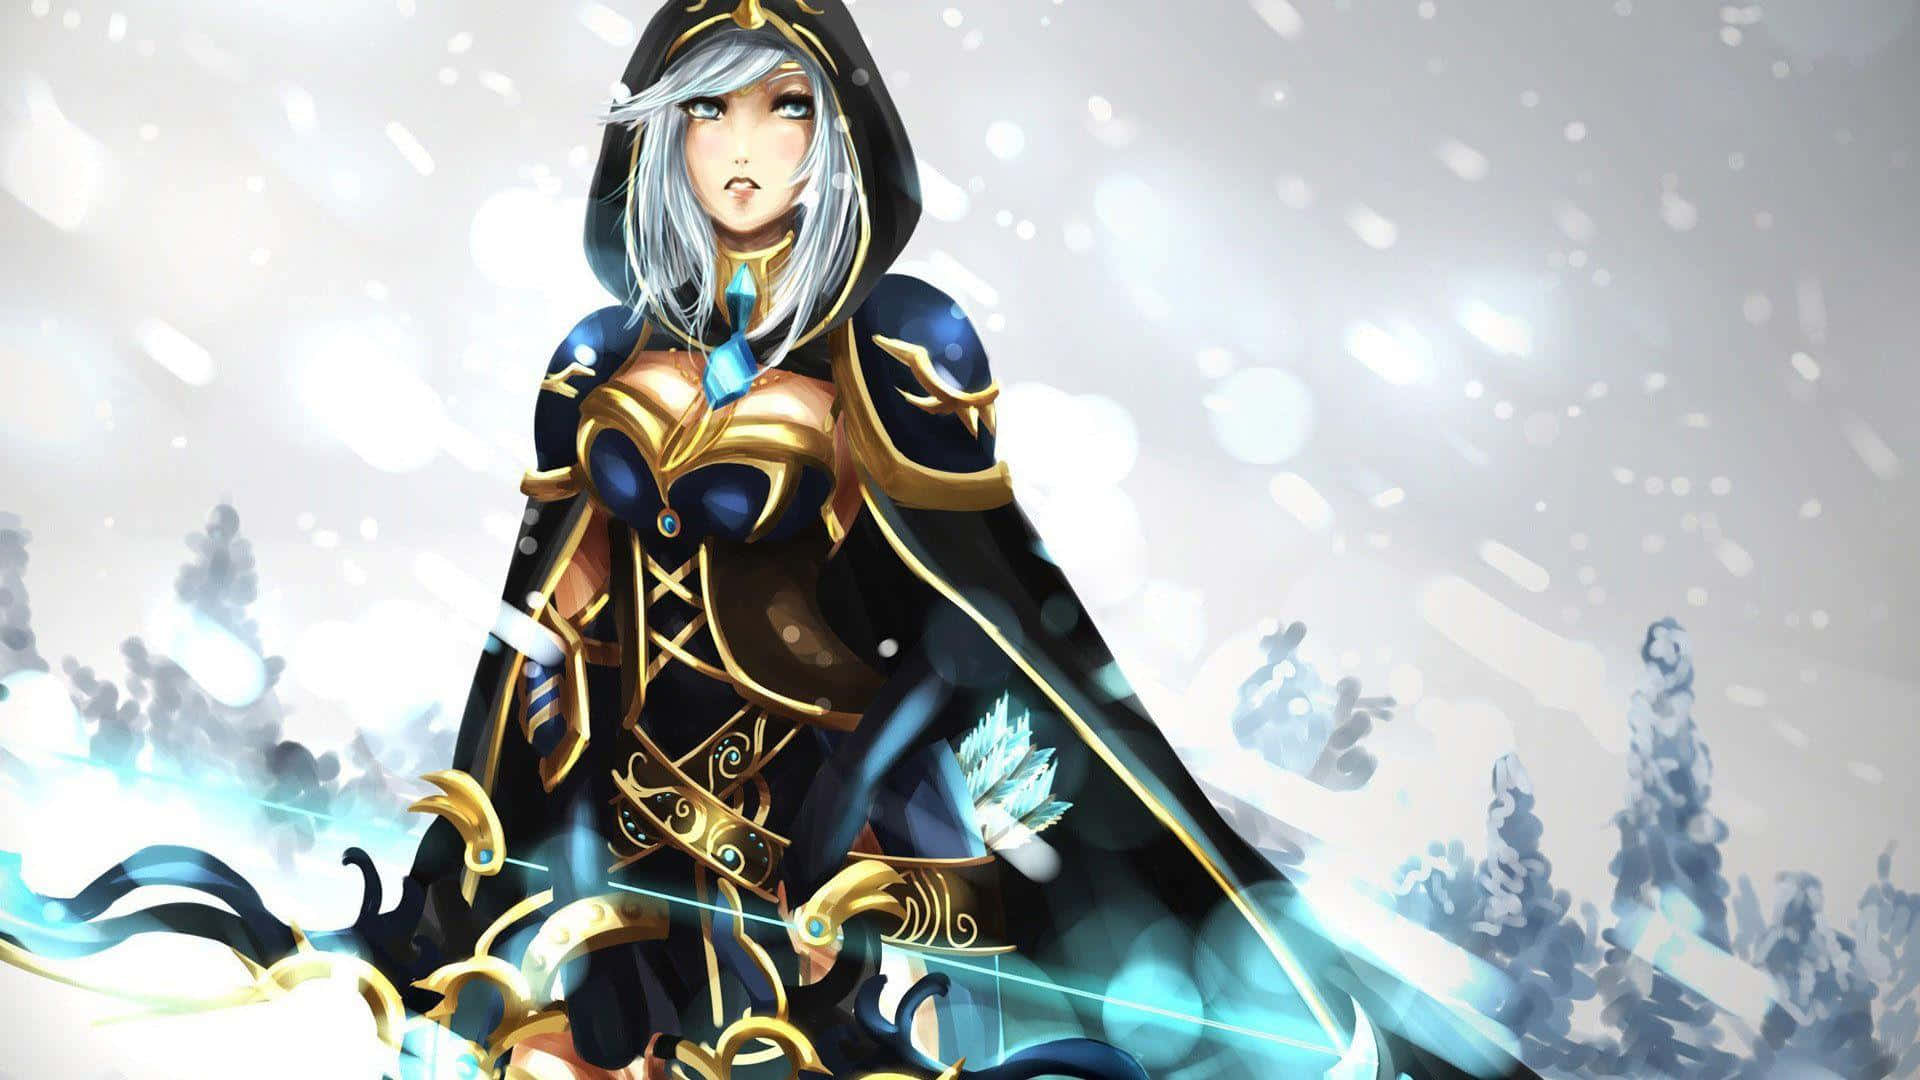 Crystal Maiden - The dazzling sorceress in action Wallpaper